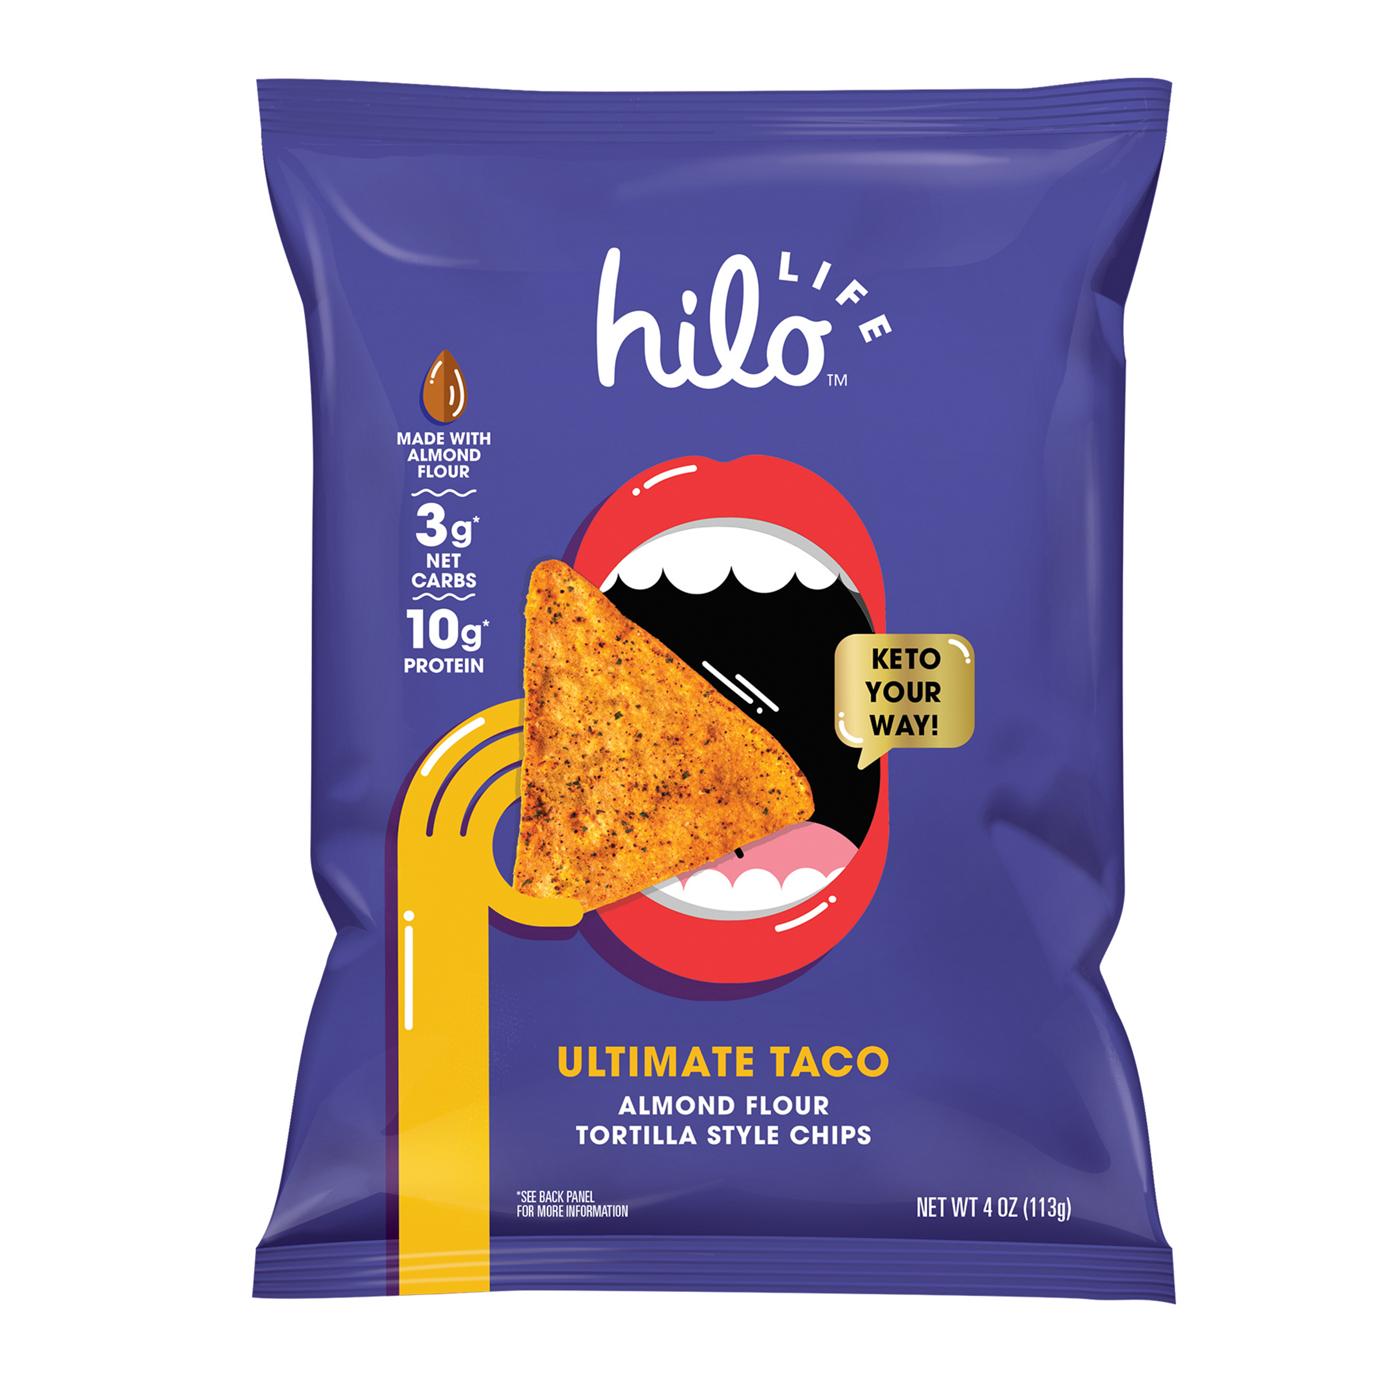 Hilo Life Ultimate Taco Tortilla Style Almond Flour Chips; image 1 of 2